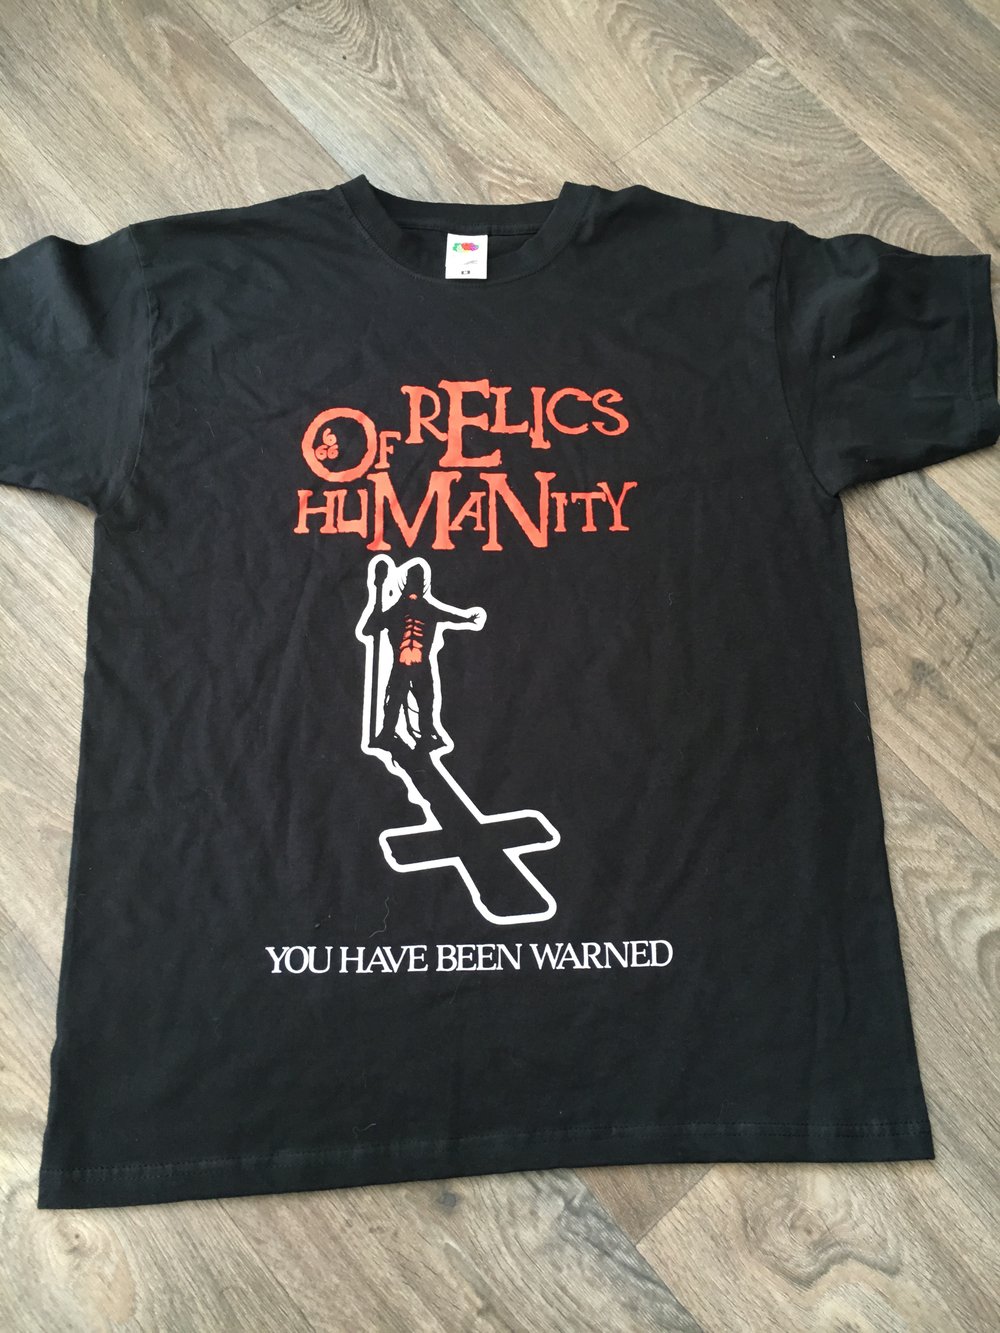 RELICS OF HUMANITY - You Have Been Warned T-Shirt